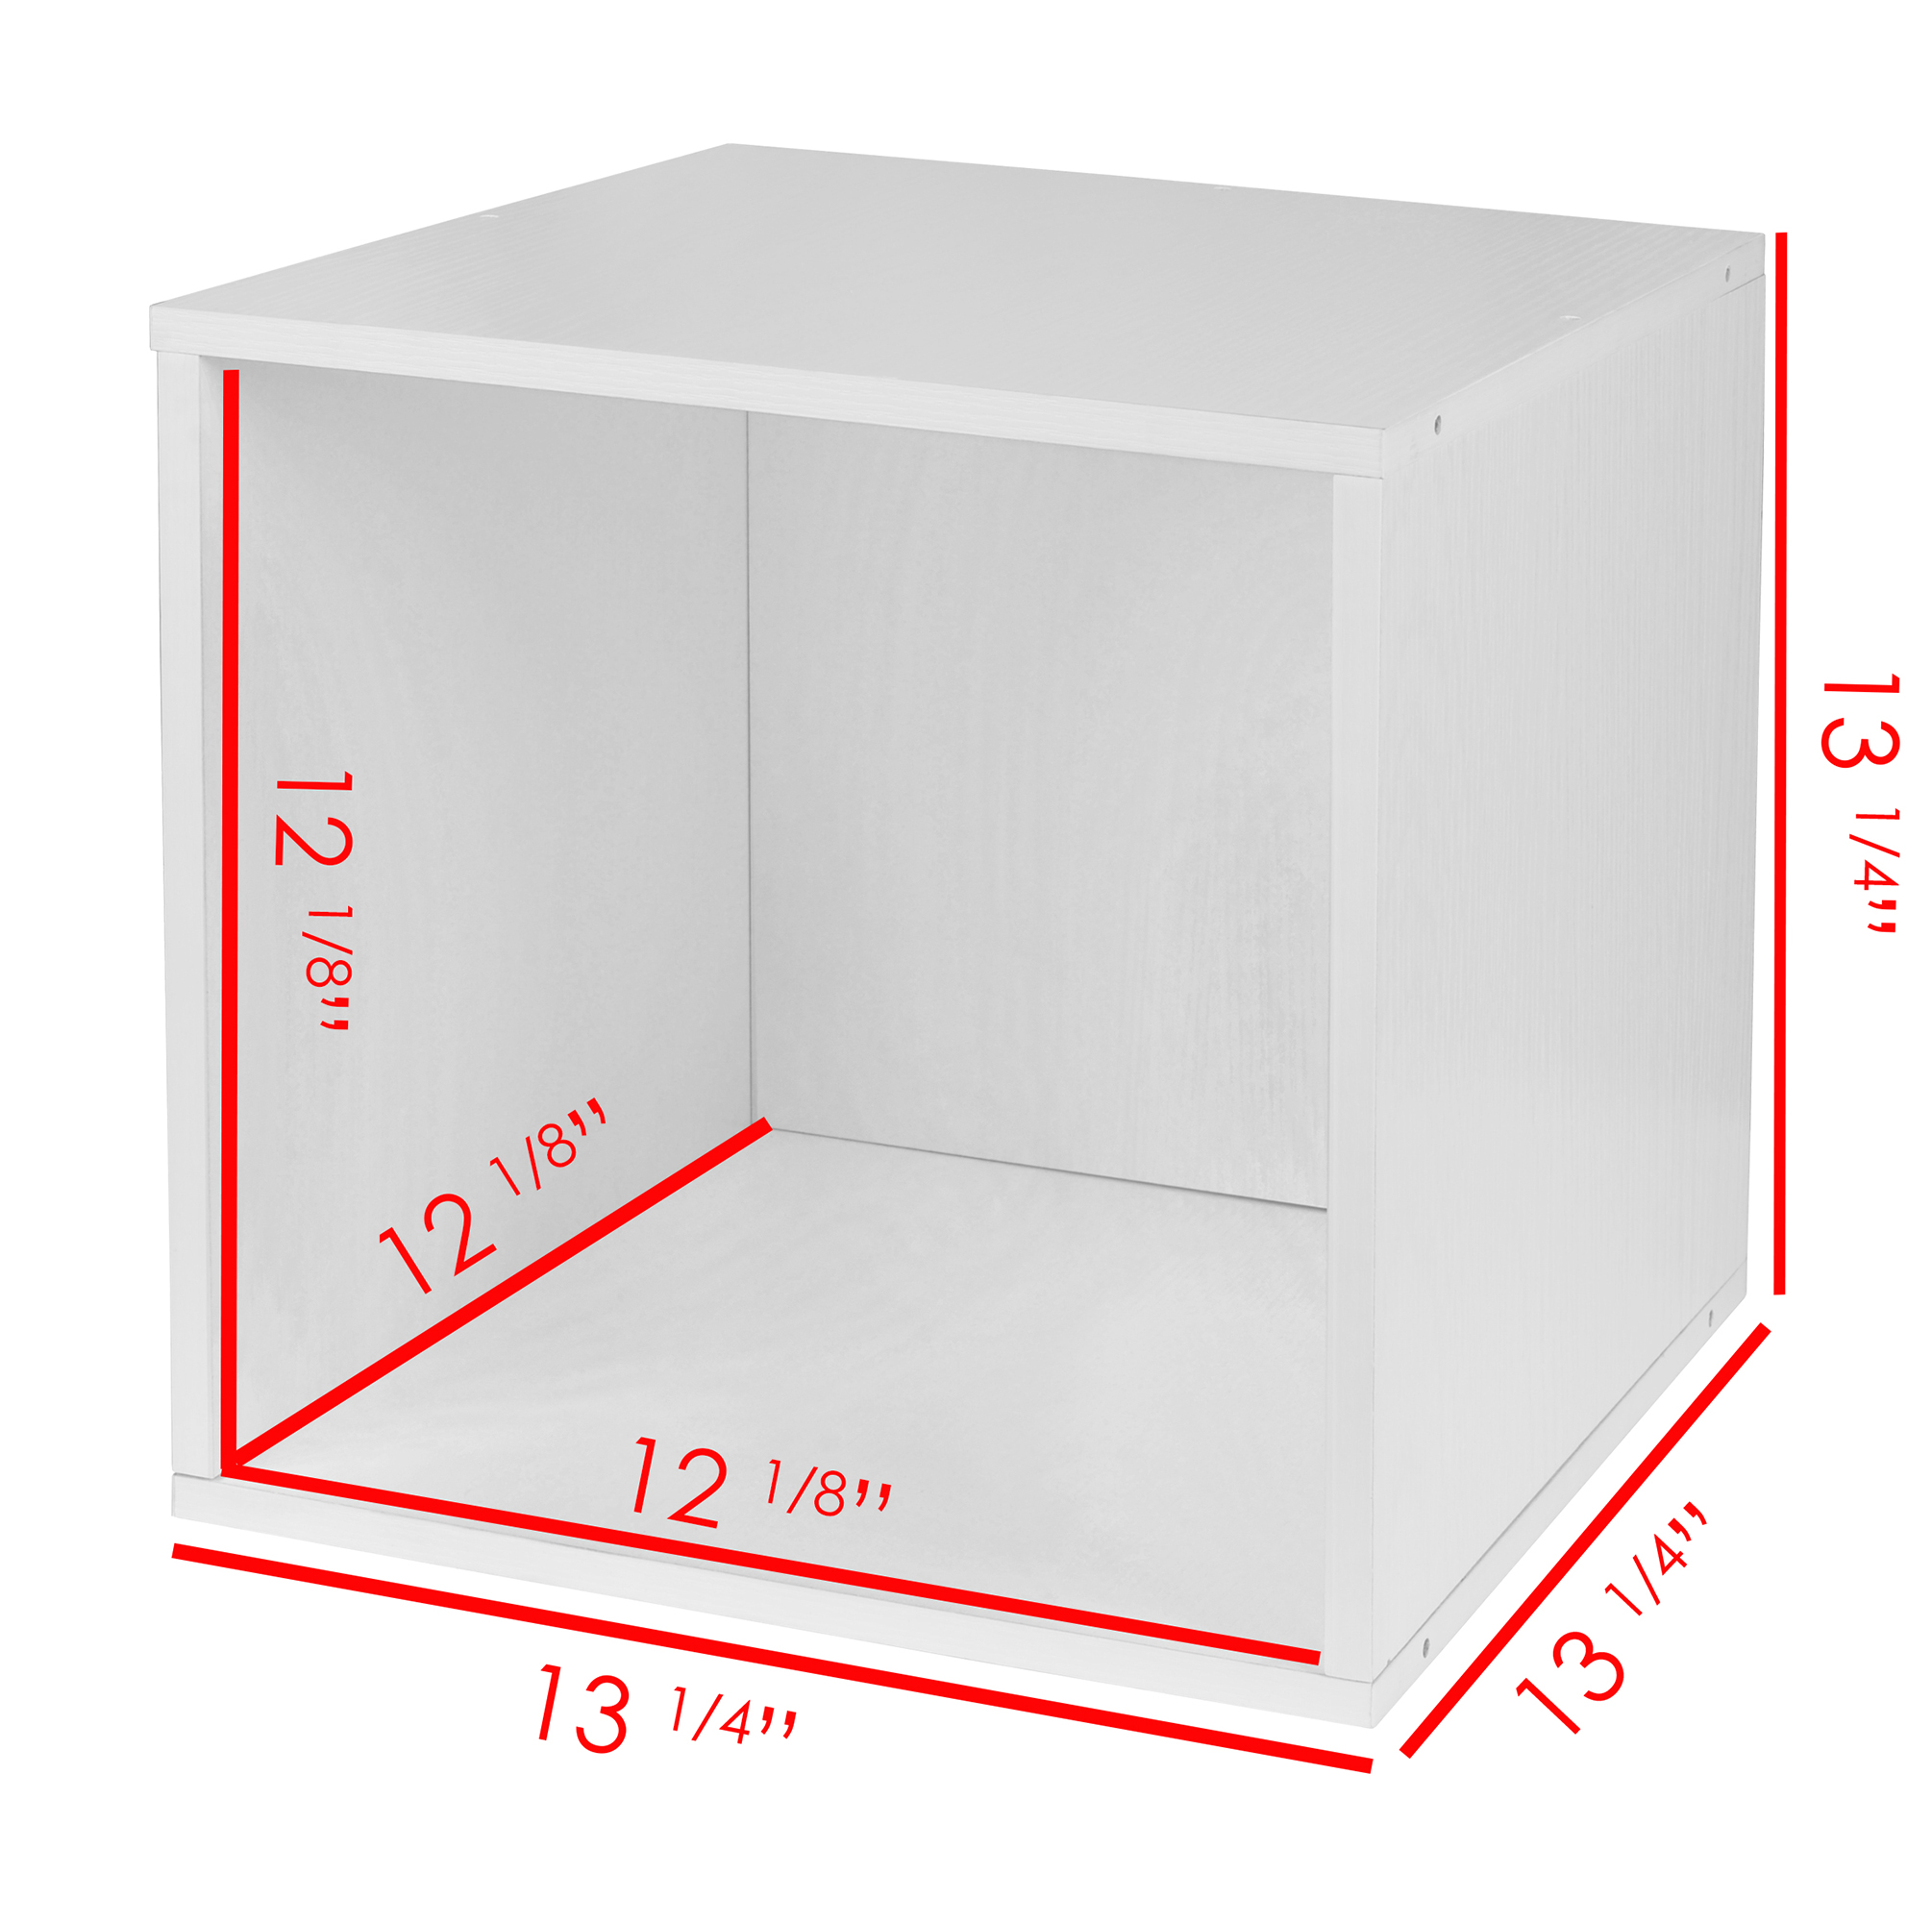 Niche Cubo Storage Set- 2 Full Cubes/4 Half Cubes with Foldable Storage Bins- White Wood Grain/Grey - image 5 of 8